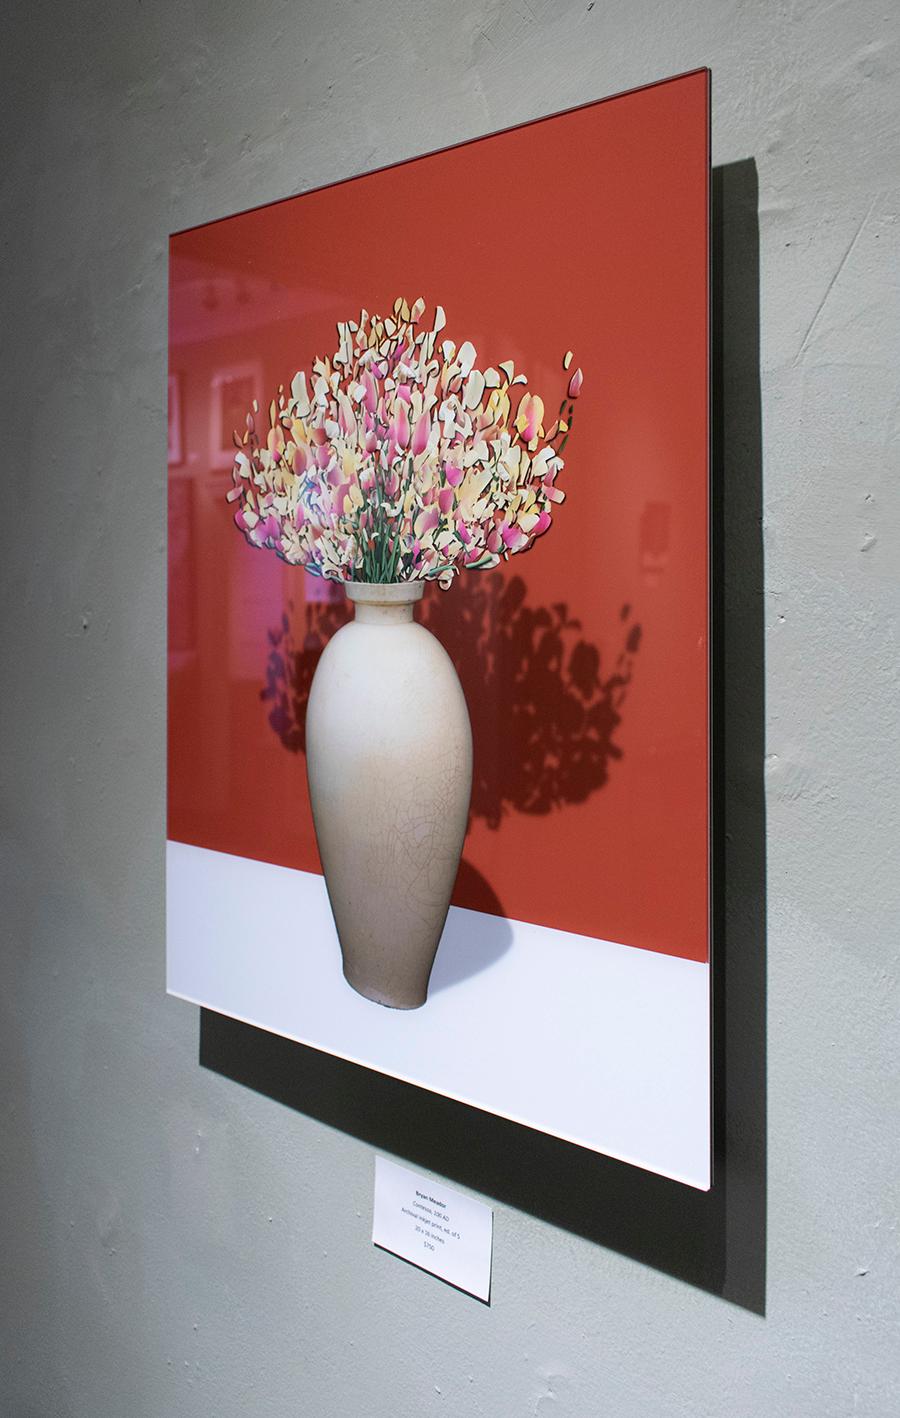 Contessa 1000 AD: Abstract Flower Still Life of Antique Vase on Coral Background - Photograph by Bryan Meador